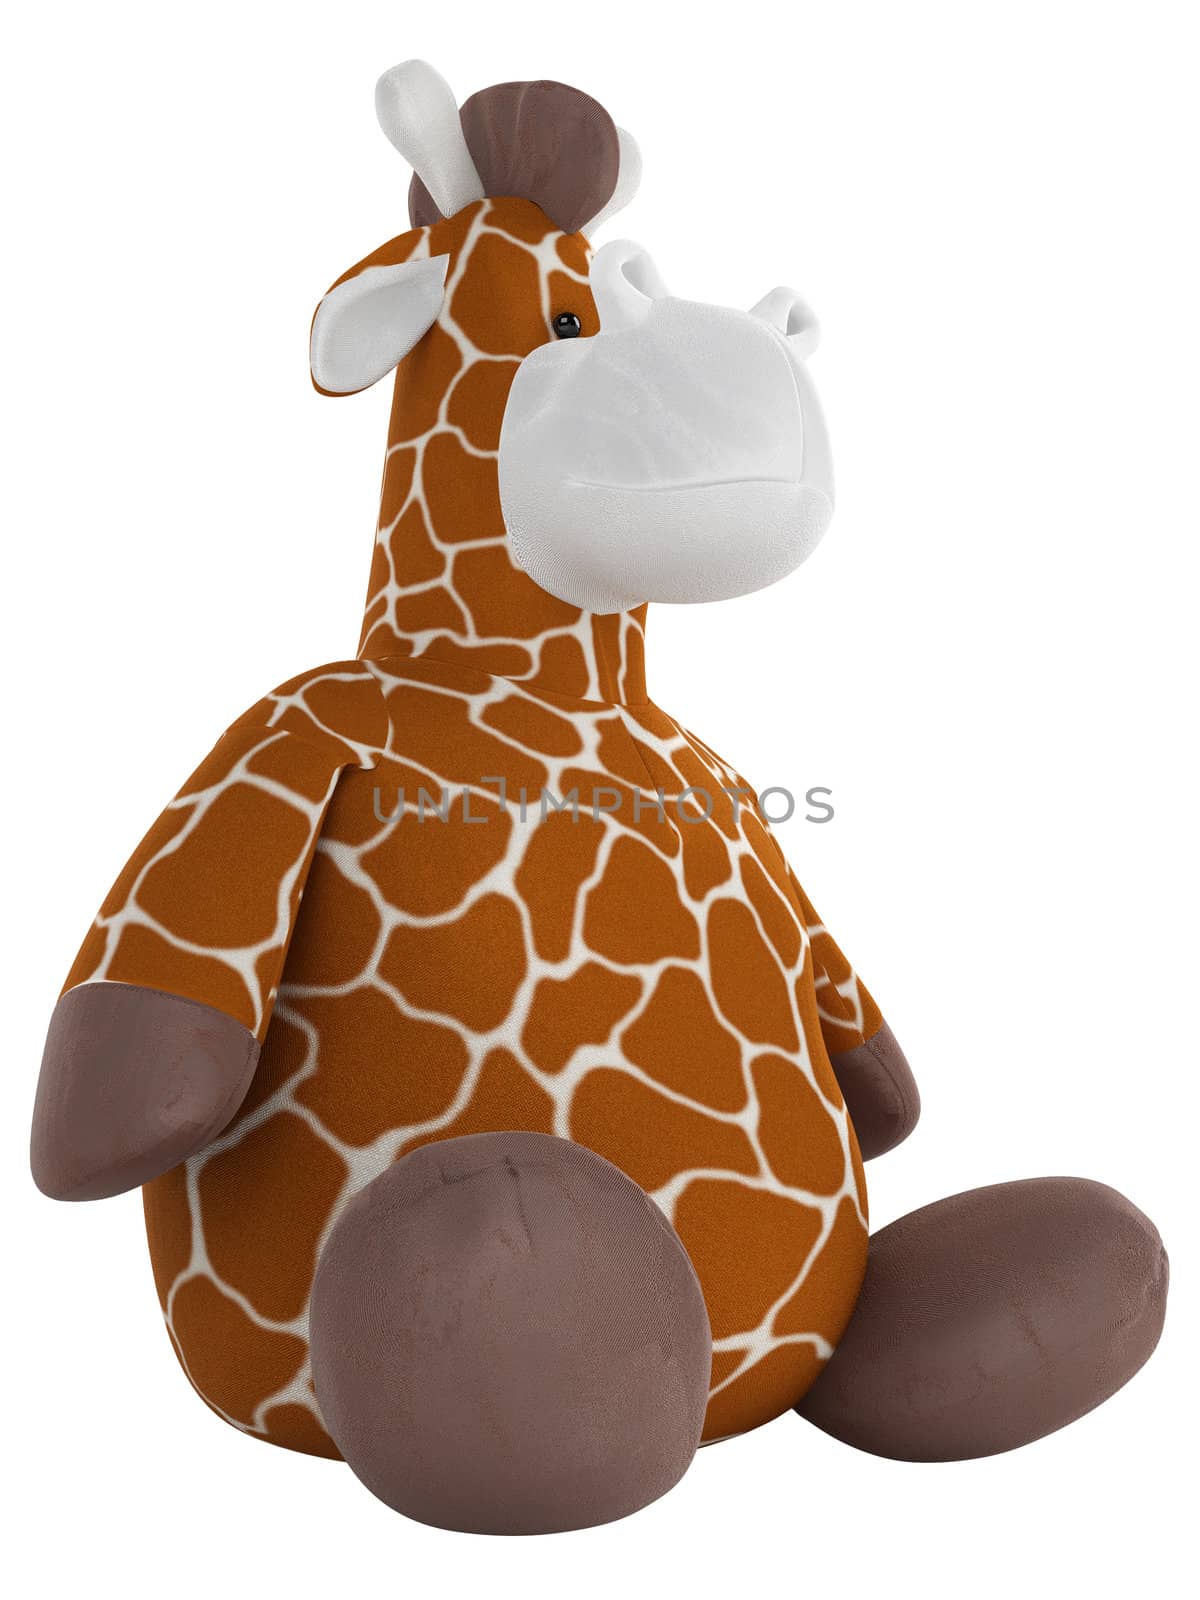 Adorable fat cuddly stuffed giraffe with a spotted pattern on its coat sitting on the floor isolated on white